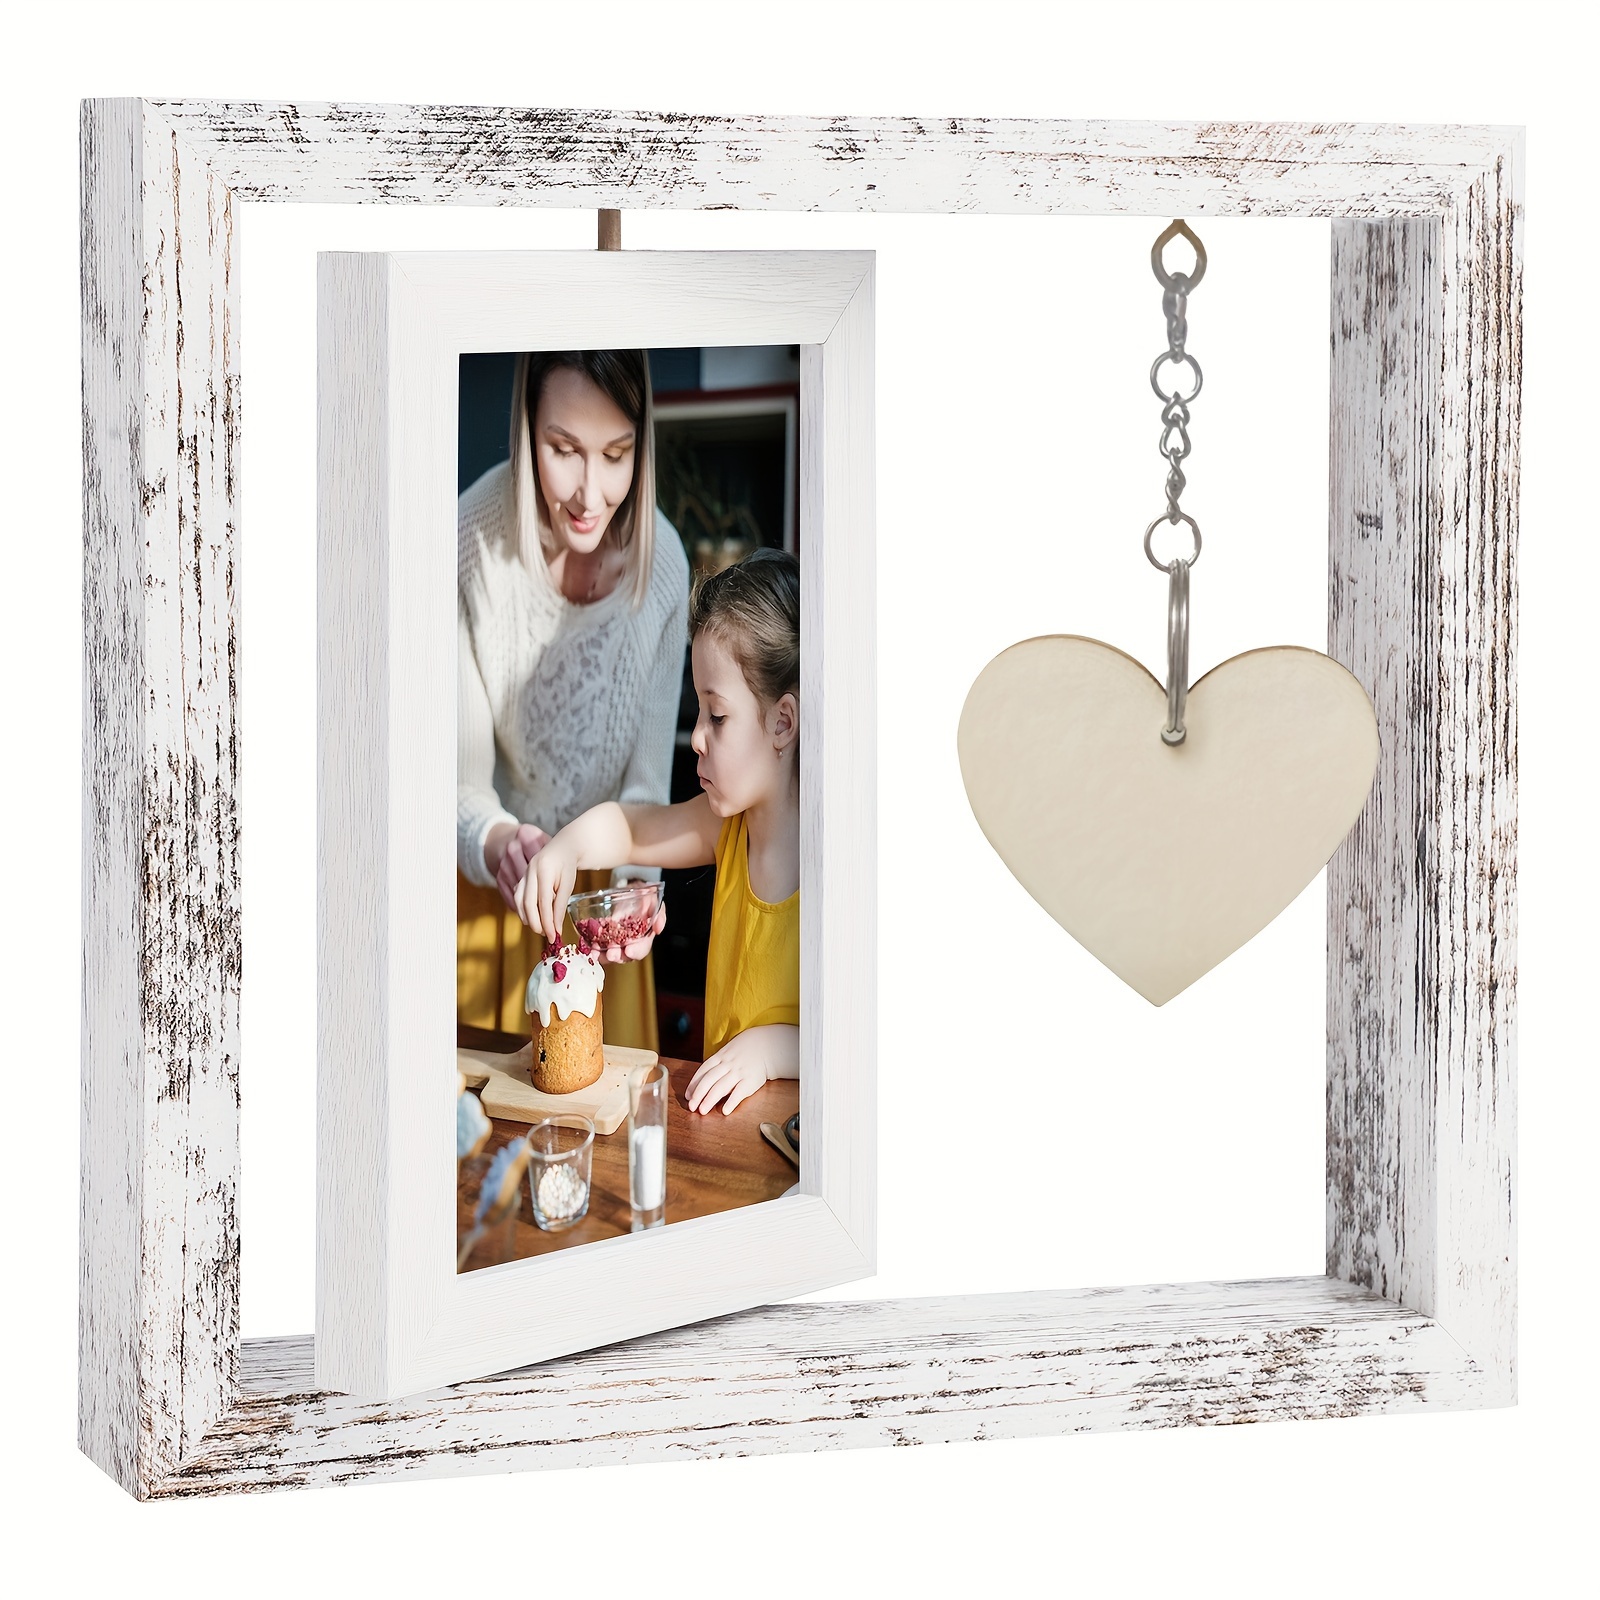 1pc Good Friend Wooden Picture Frame Gift Good Friend Wood Photo Frame  Gifts For Friend Birthday And Christmas Tabletop And Wall Mounting 4x6 Inch  10 16x15 24 Cm Photo - Home 